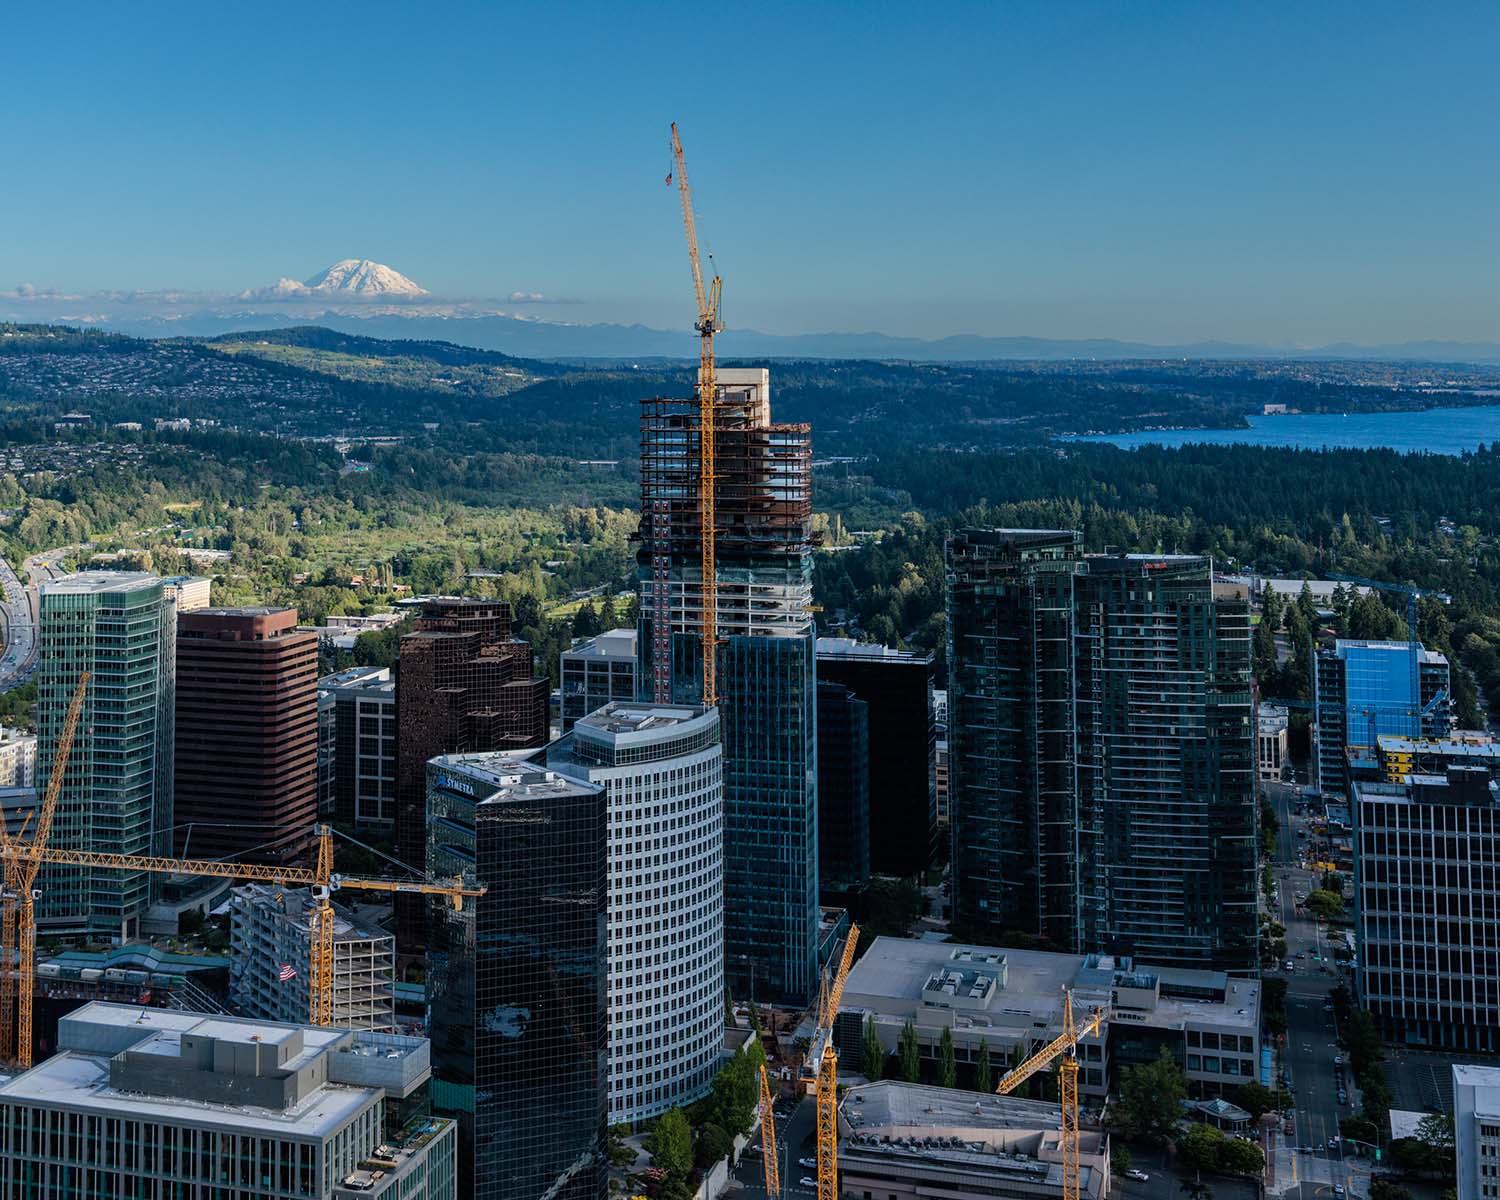 Aerial view of 555 Tower under construction with Mt Rainier in the background